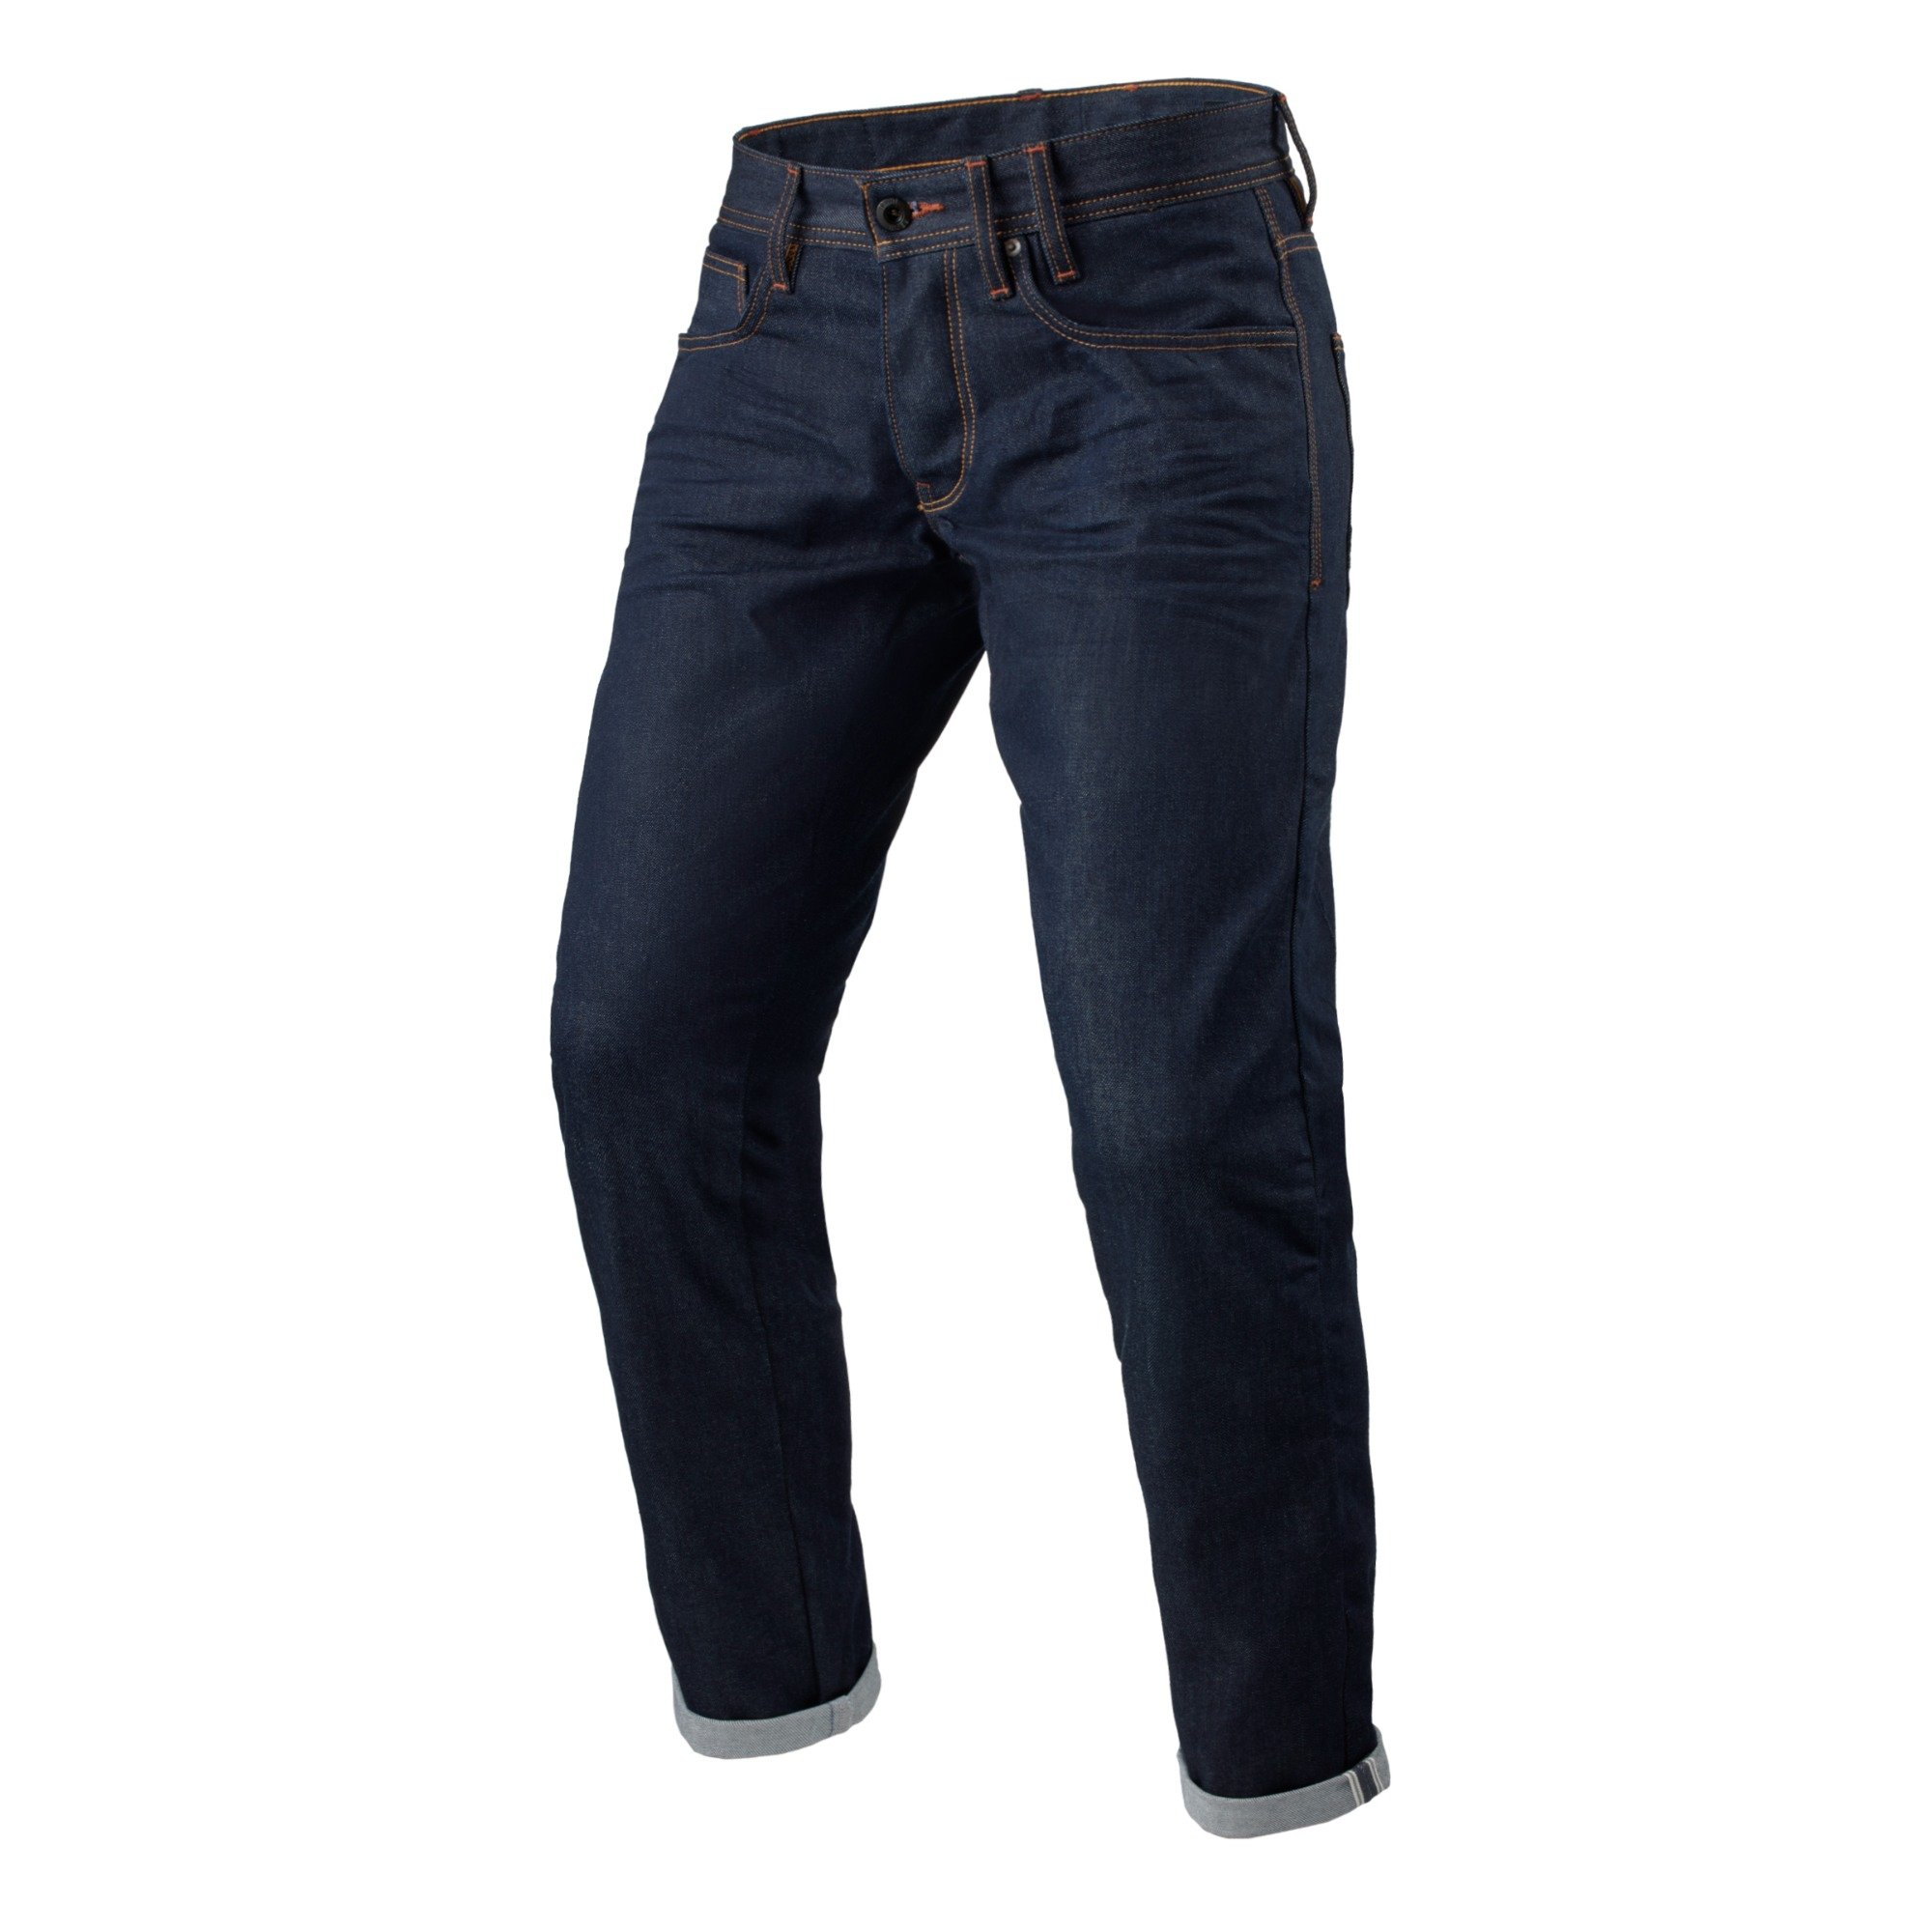 Image of REV'IT! Jeans Lewis Selvedge TF Dark Blue L32 Motorcycle Pants Size L32/W36 ID 8700001358088